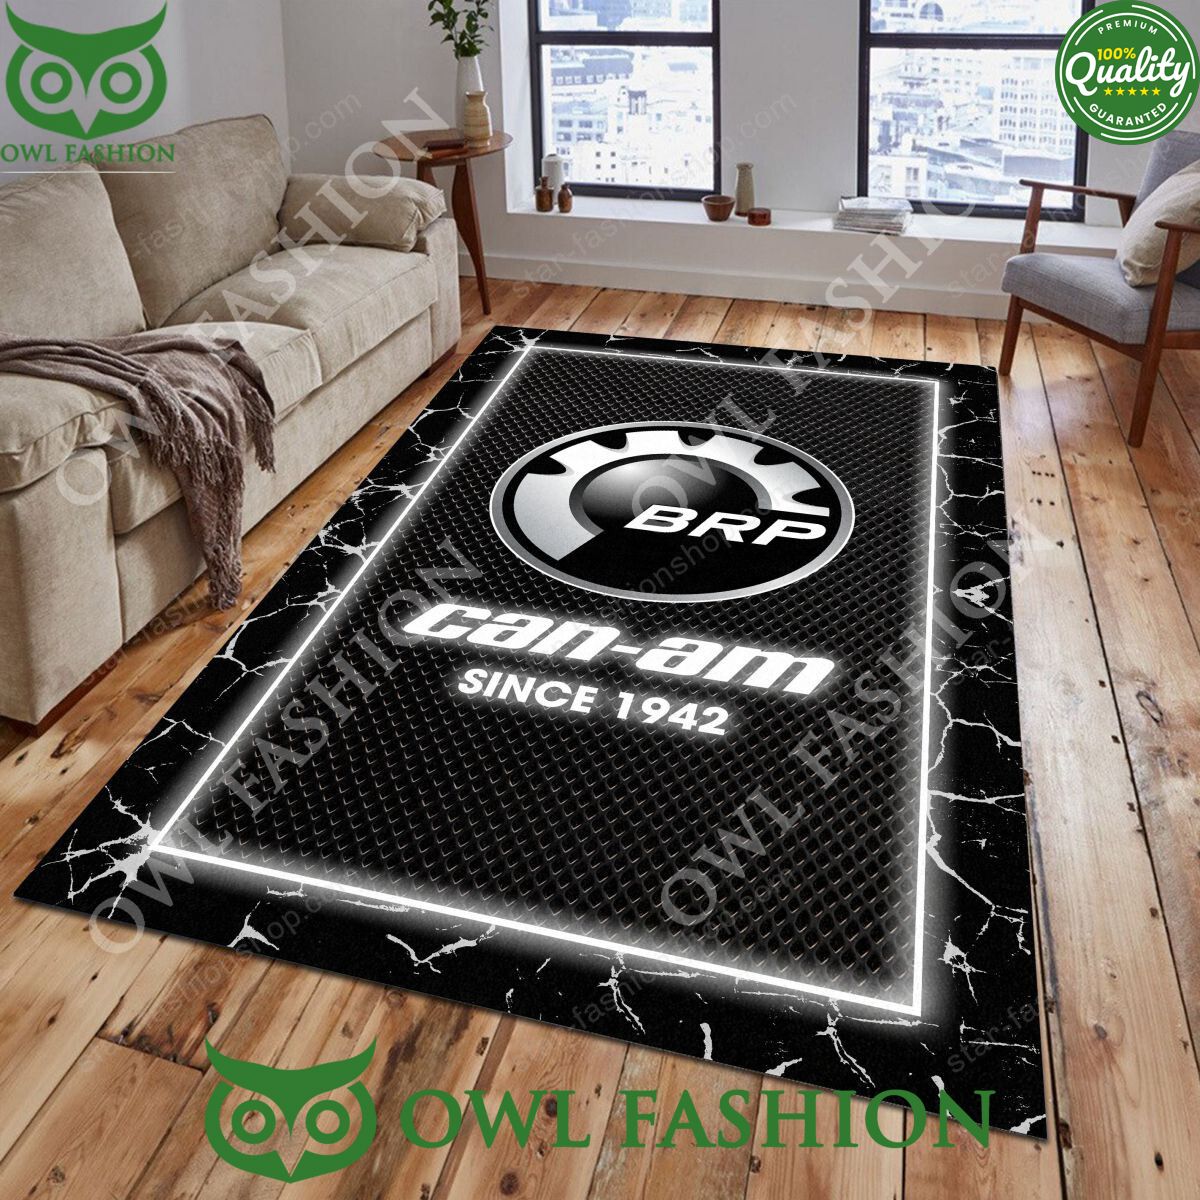 Trending BRP Can am Motorcycle Brand Carpet Rug